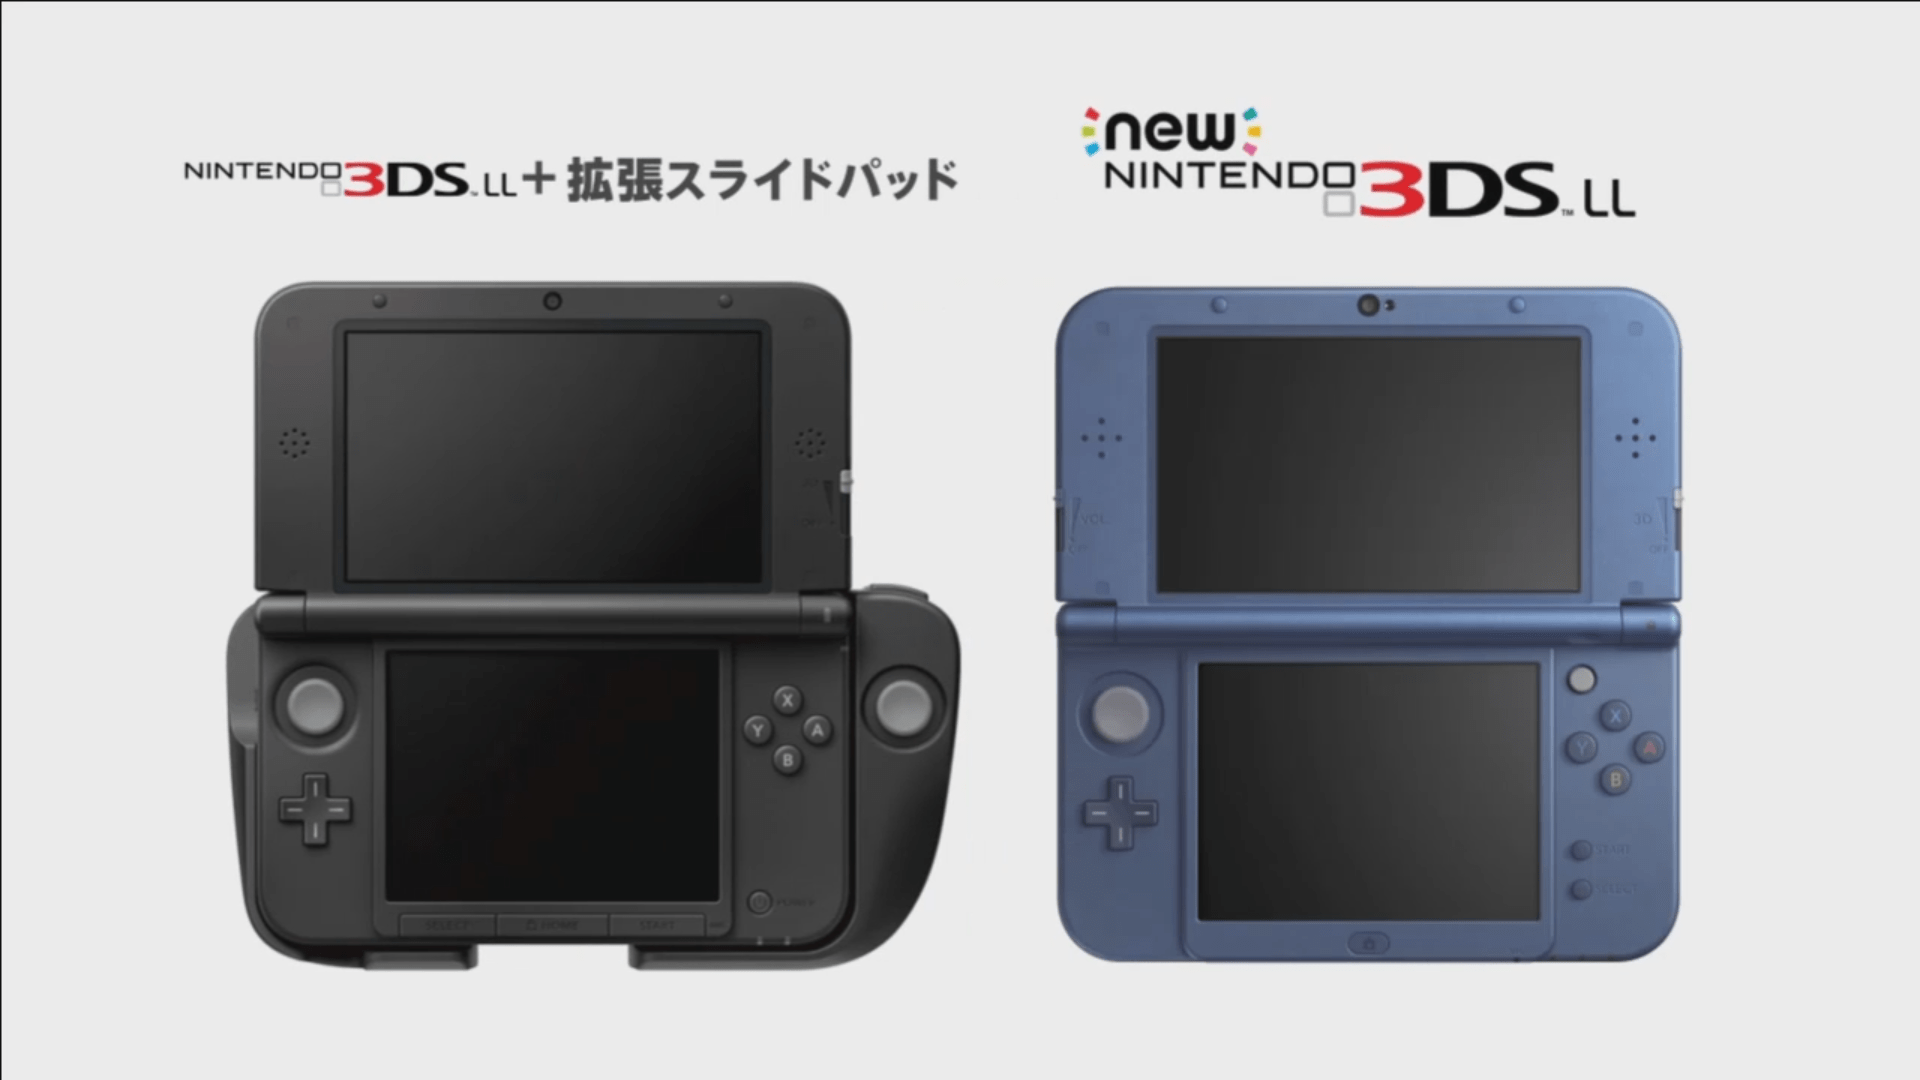 How Does The ‘New’ 3DS Compare To The ‘Old’ One?